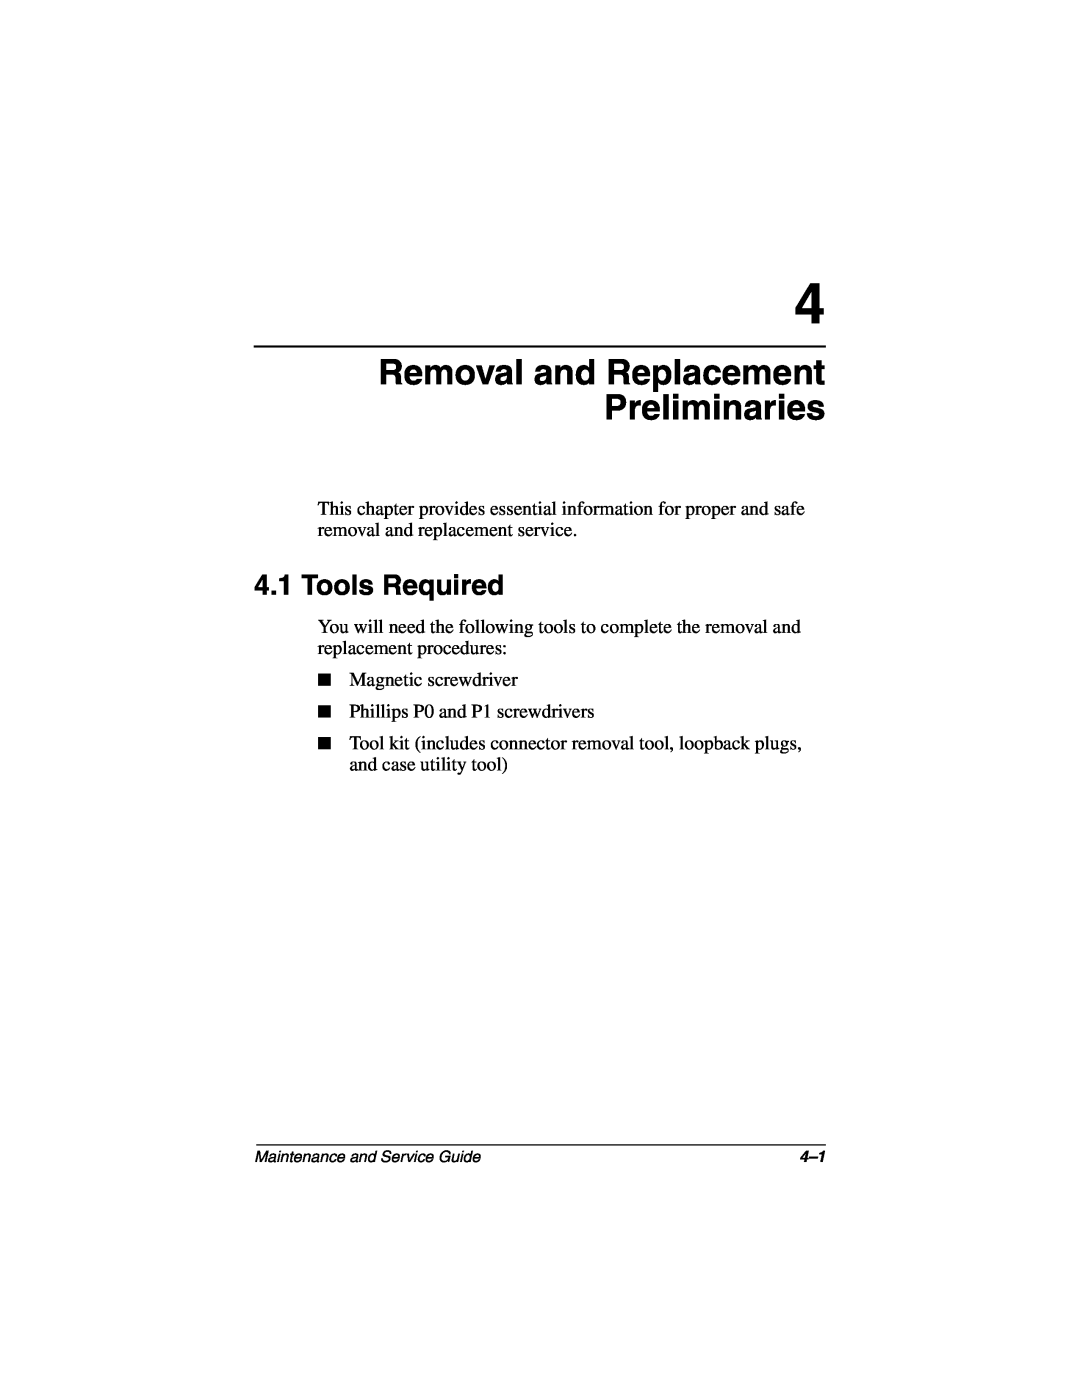 Compaq N160 manual Removal and Replacement Preliminaries, Tools Required 